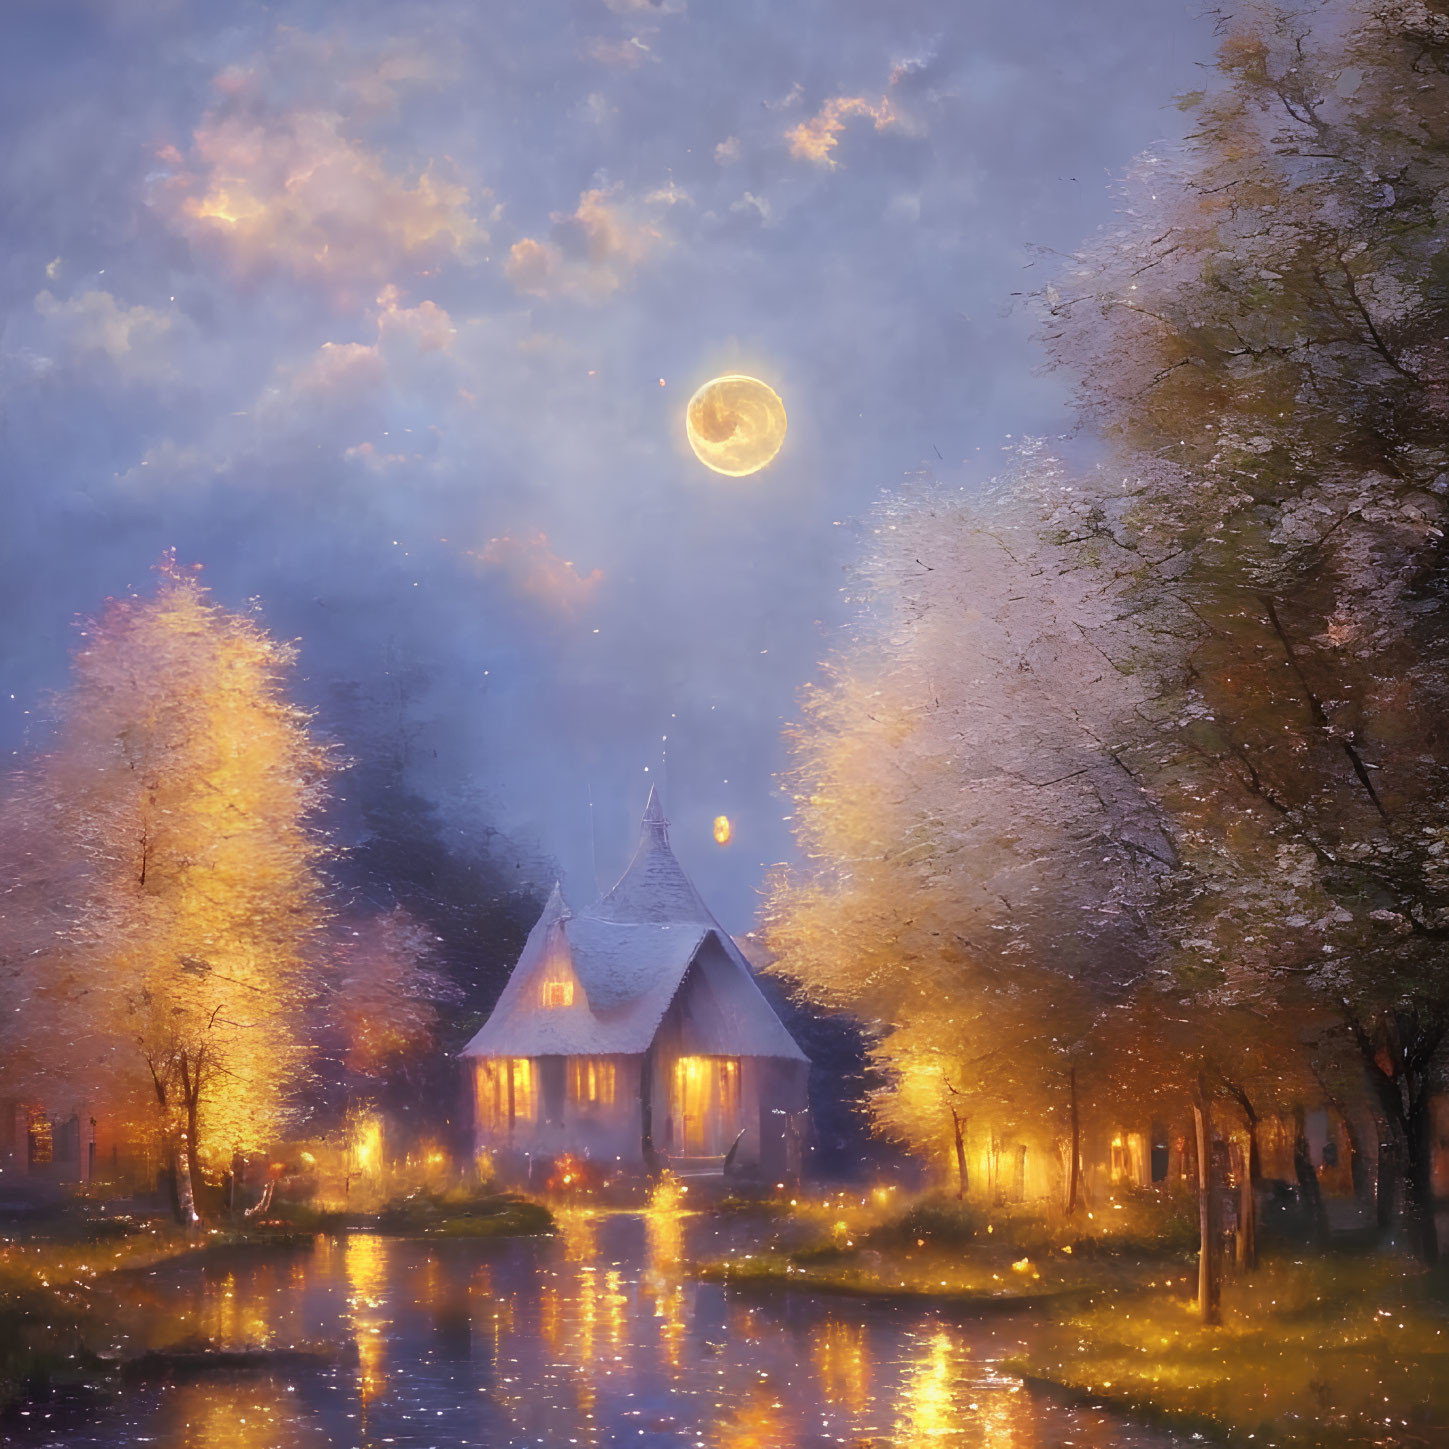 Glowing cottage by serene pond in moonlit autumn landscape